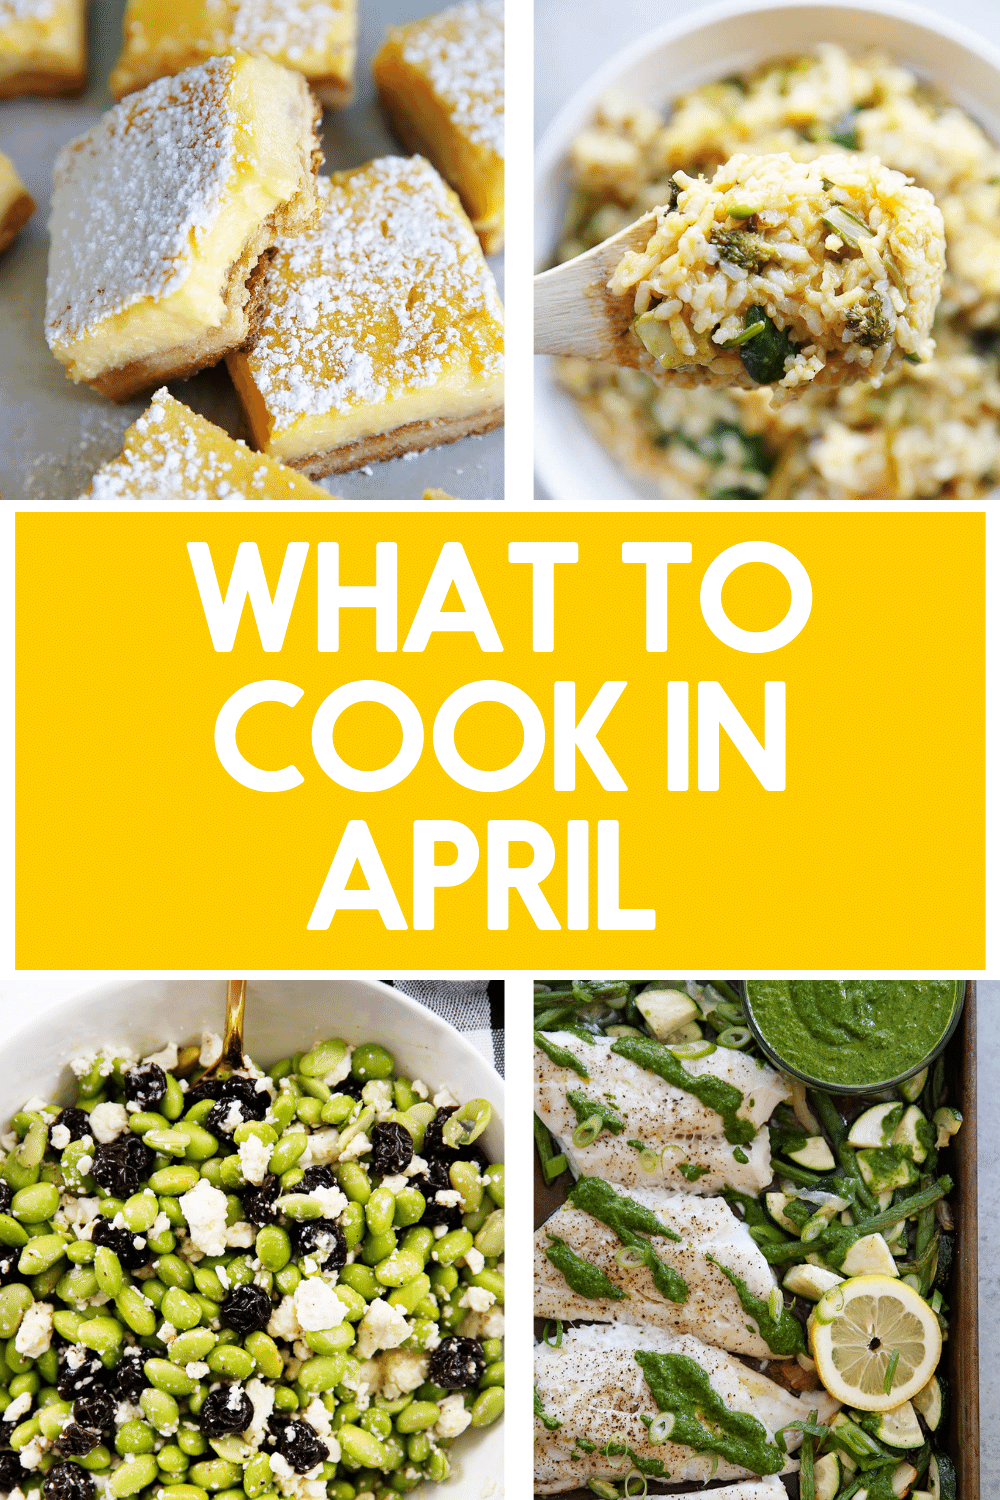 What to cook in April